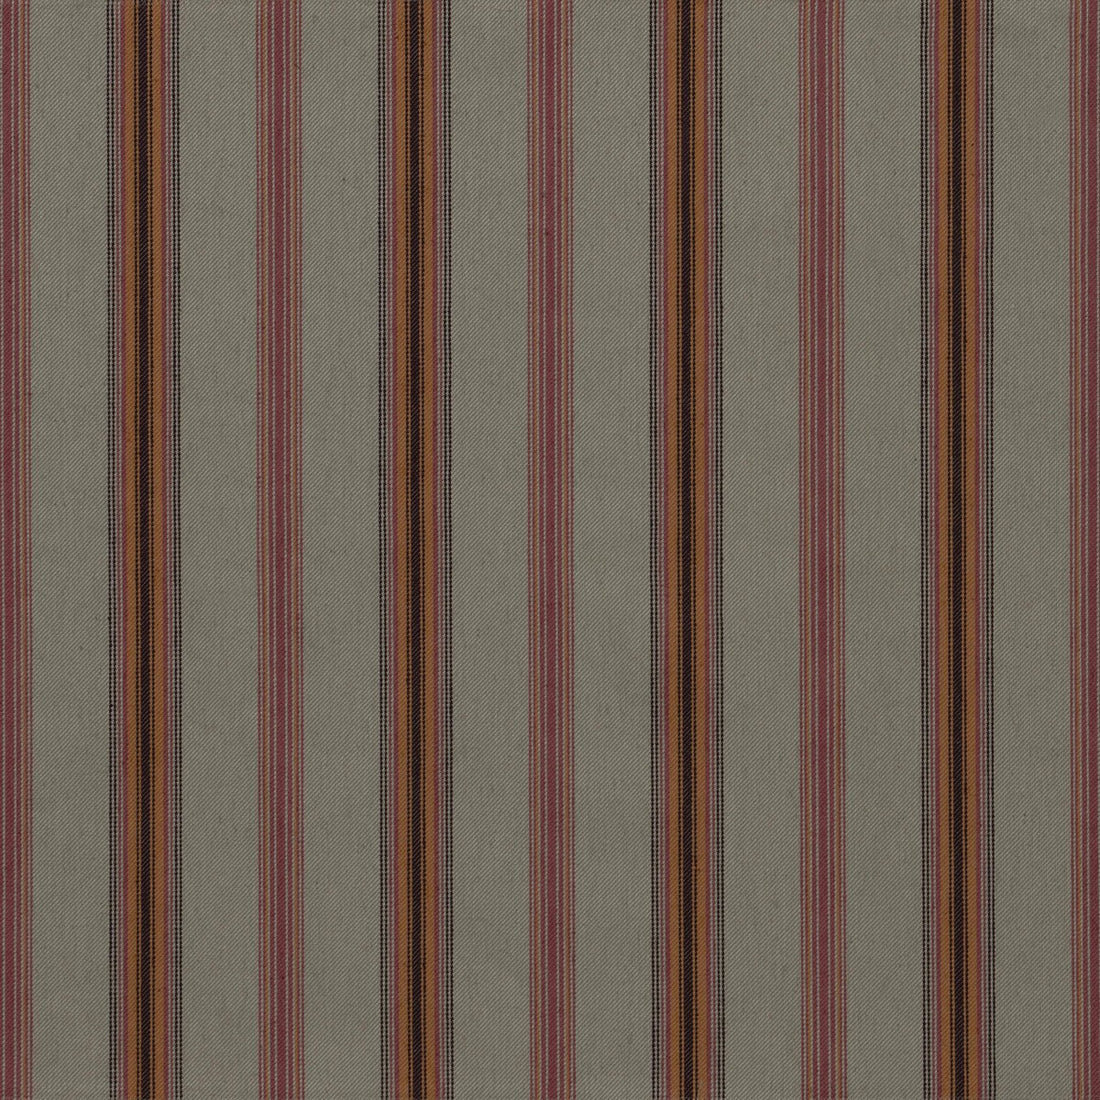 Canfield Stripe fabric in silver color - pattern BFC-3670.11.0 - by Lee Jofa in the Blithfield collection